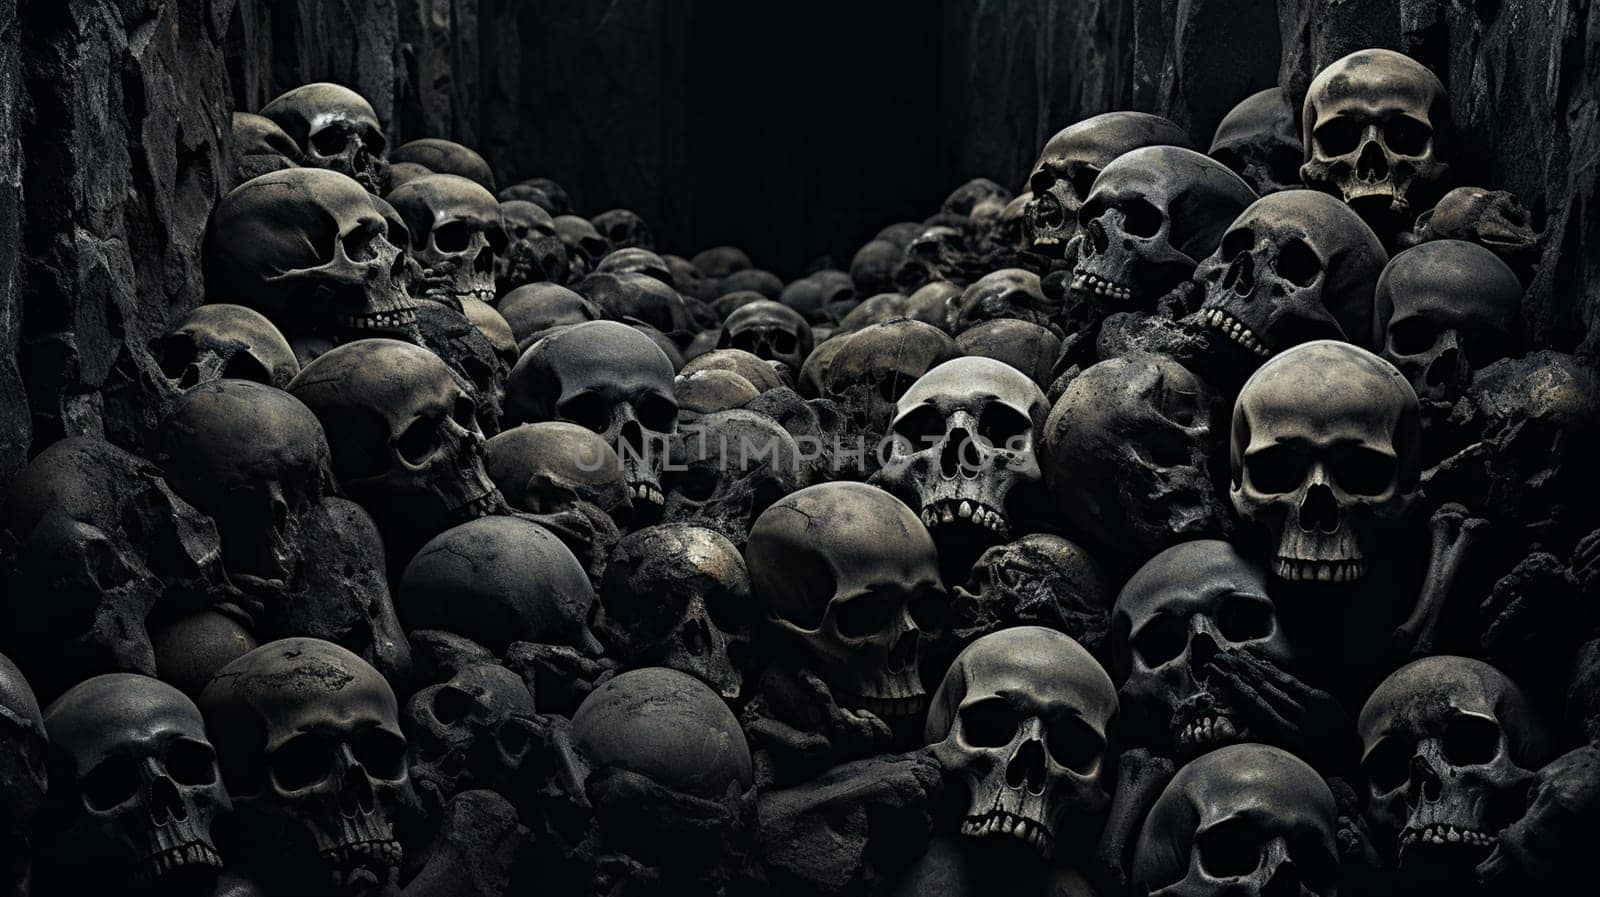 Awesome pile of skull human and bone on black cloth background, concept of scary crime scene of horror or thriller movies,Halloween theme, Still Life style, selective focus,. High quality photo